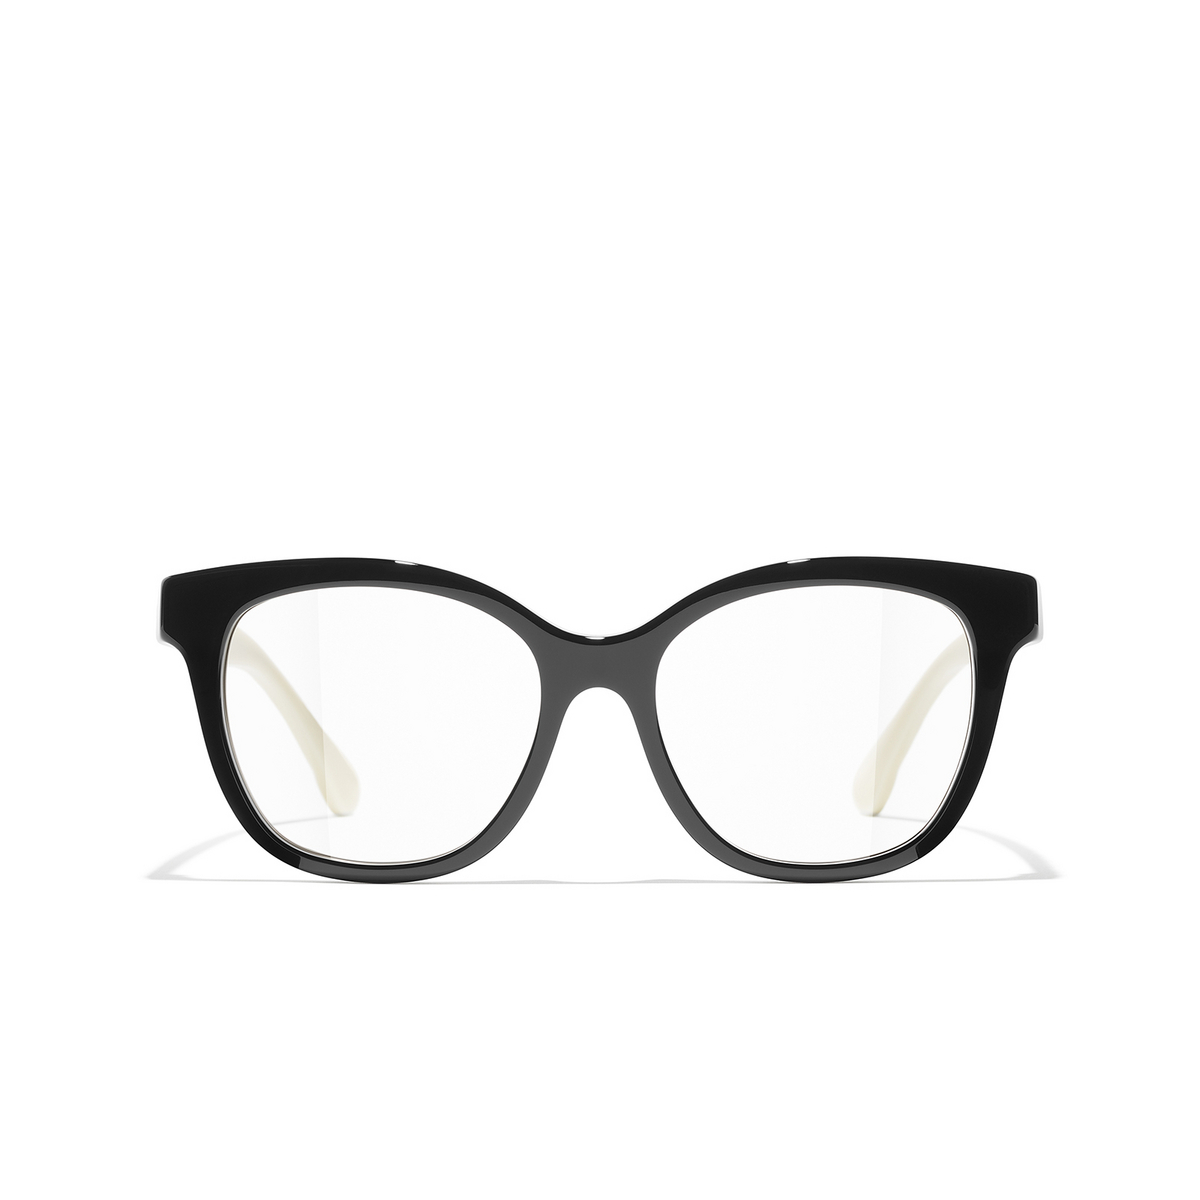 CHANEL butterfly Eyeglasses 1656 Black & White - front view